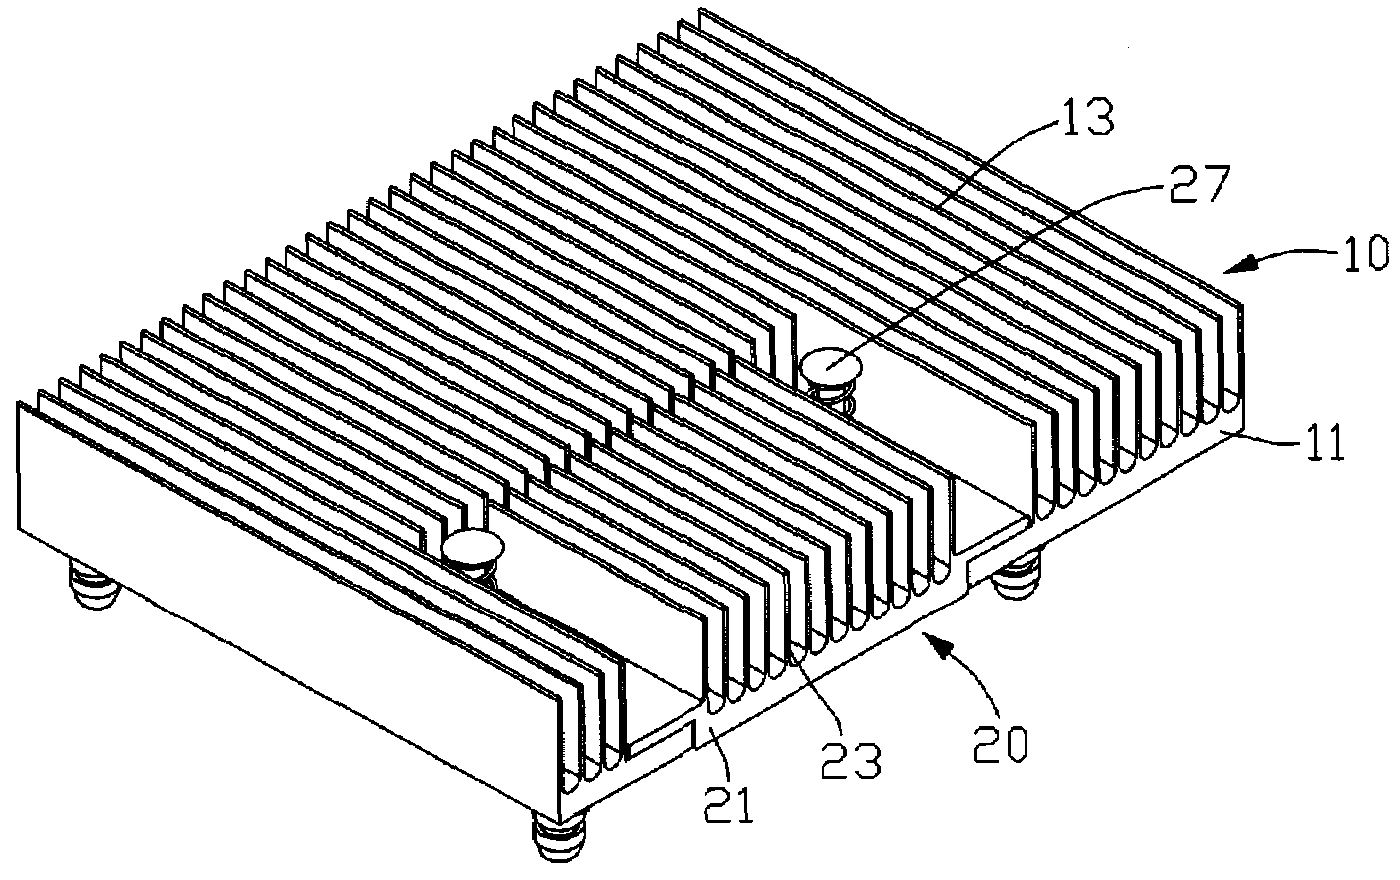 Heat sink assembly for multiple electronic components